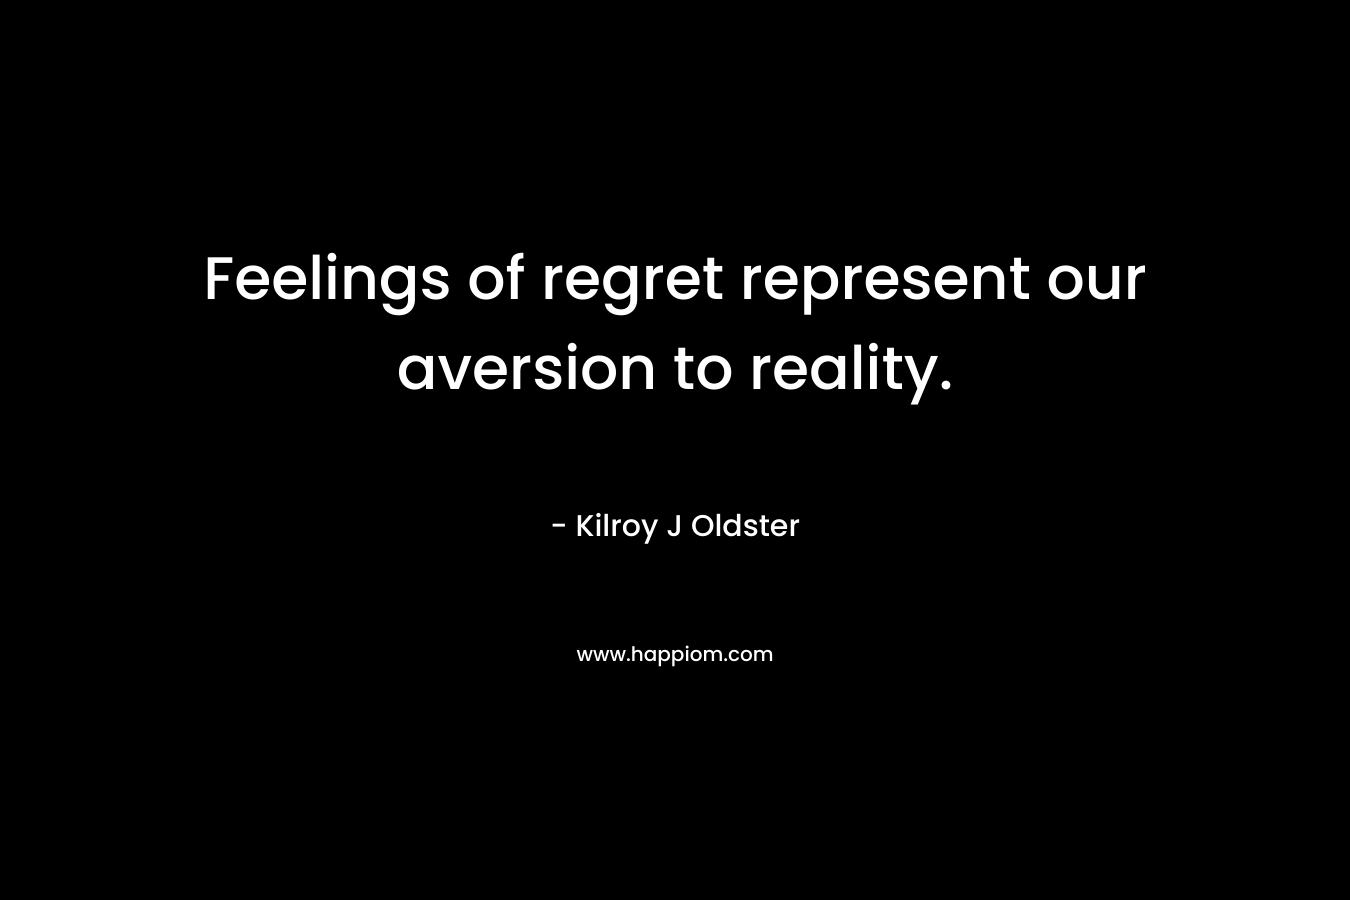 Feelings of regret represent our aversion to reality.